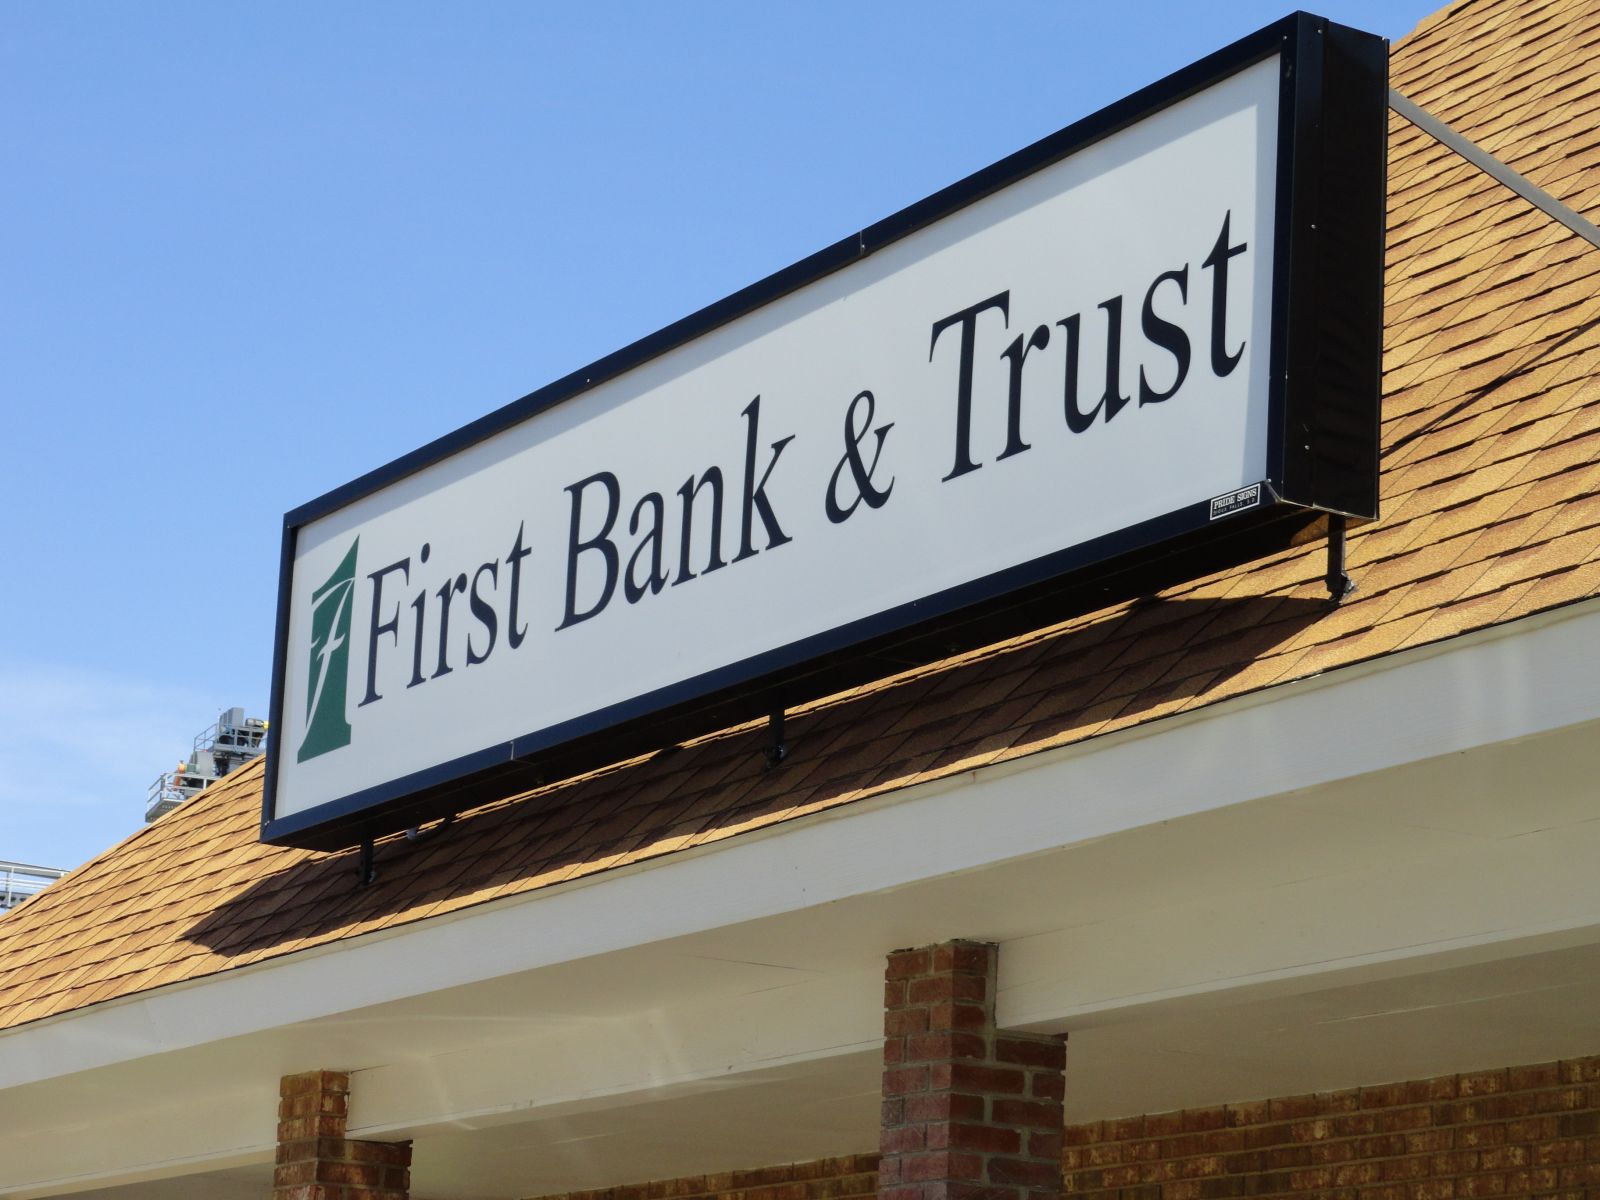 First Bank & Trust's Image